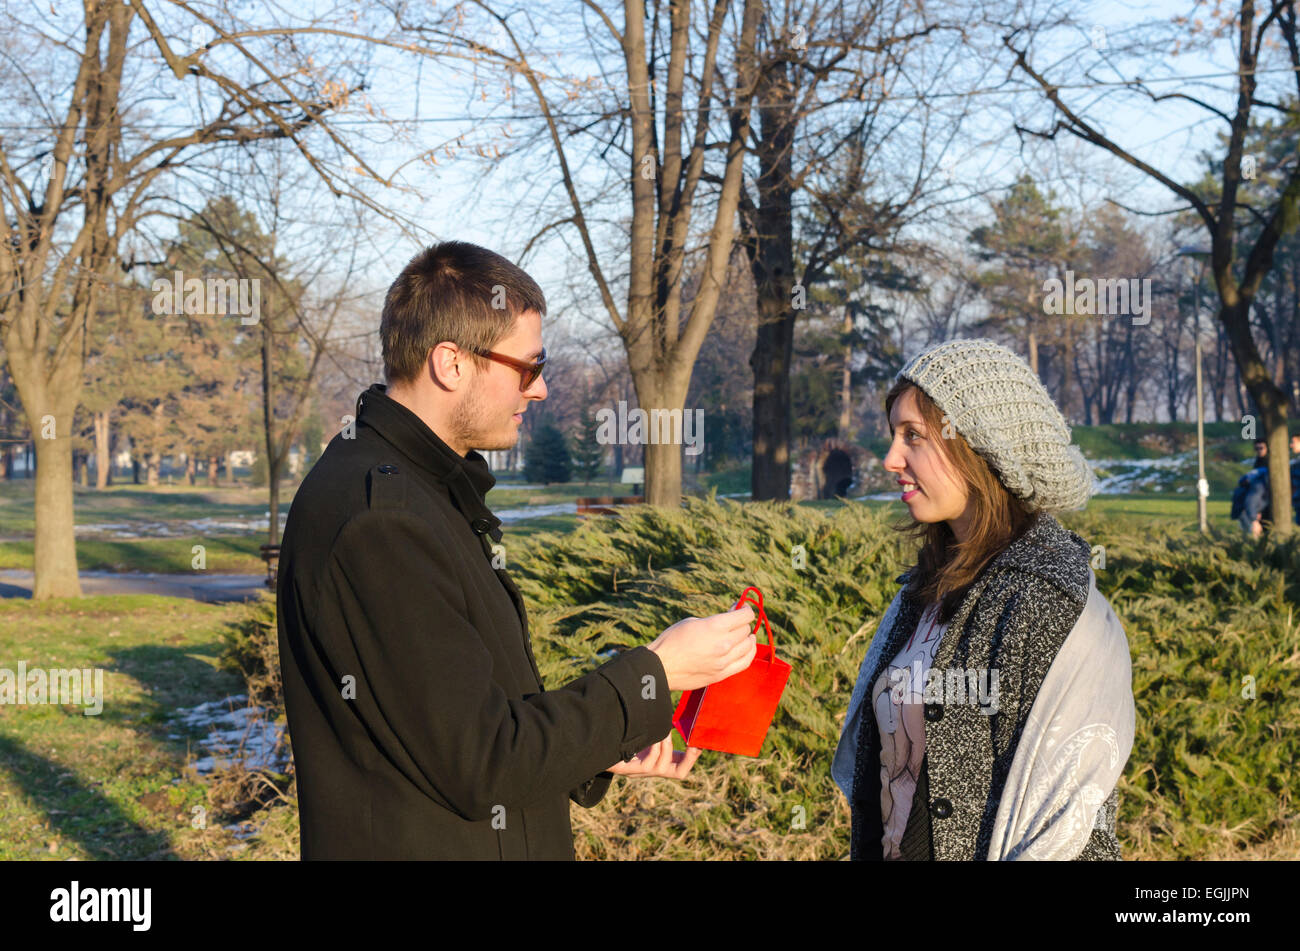 Tall boy giving a present to a girl outdoors in a park Stock Photo